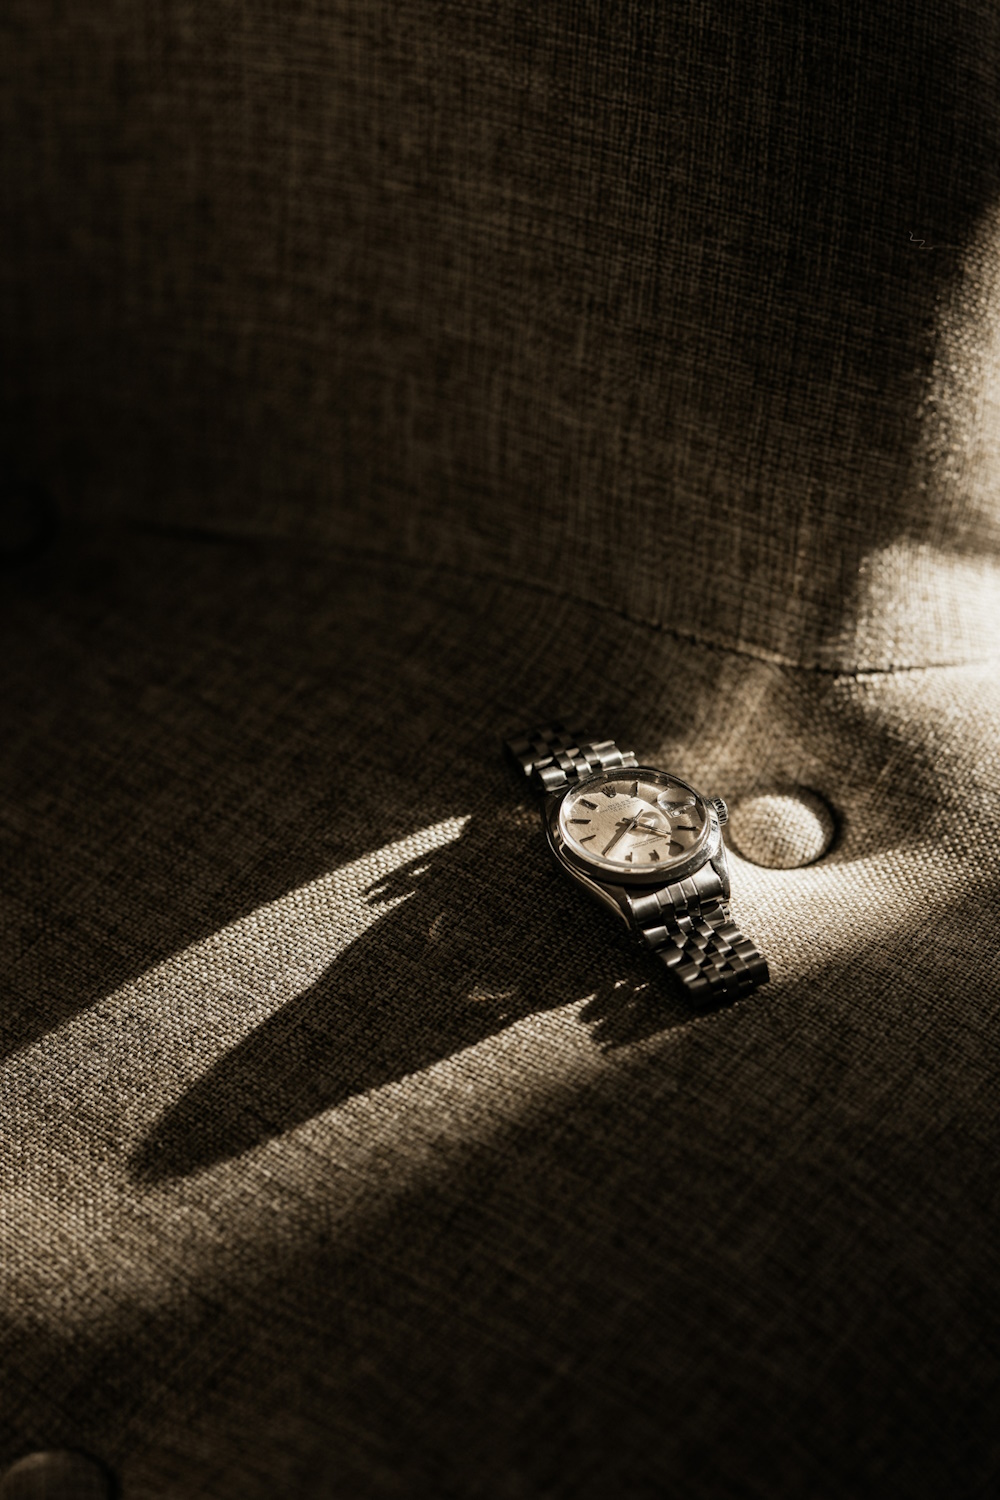 A vintage watch on a table catching the sunlight